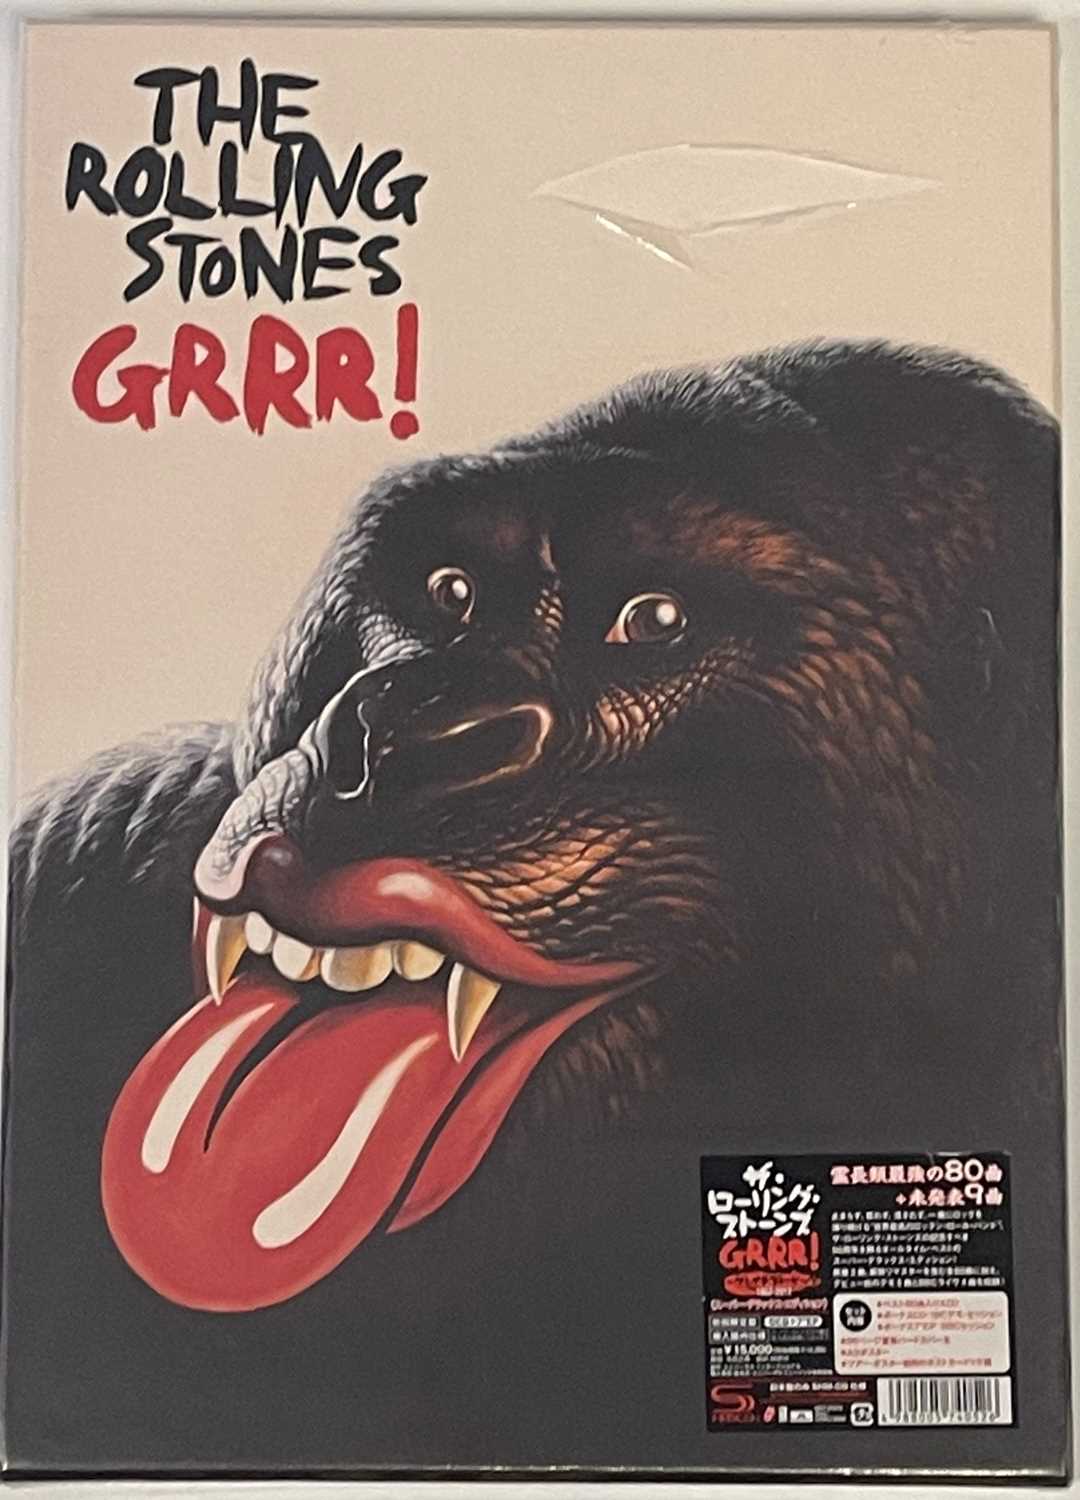 THE ROLLING STONES - GRRR! (LIMITED EDITION JAPANESE CD/7" BOX SET - UICY-91813/6)